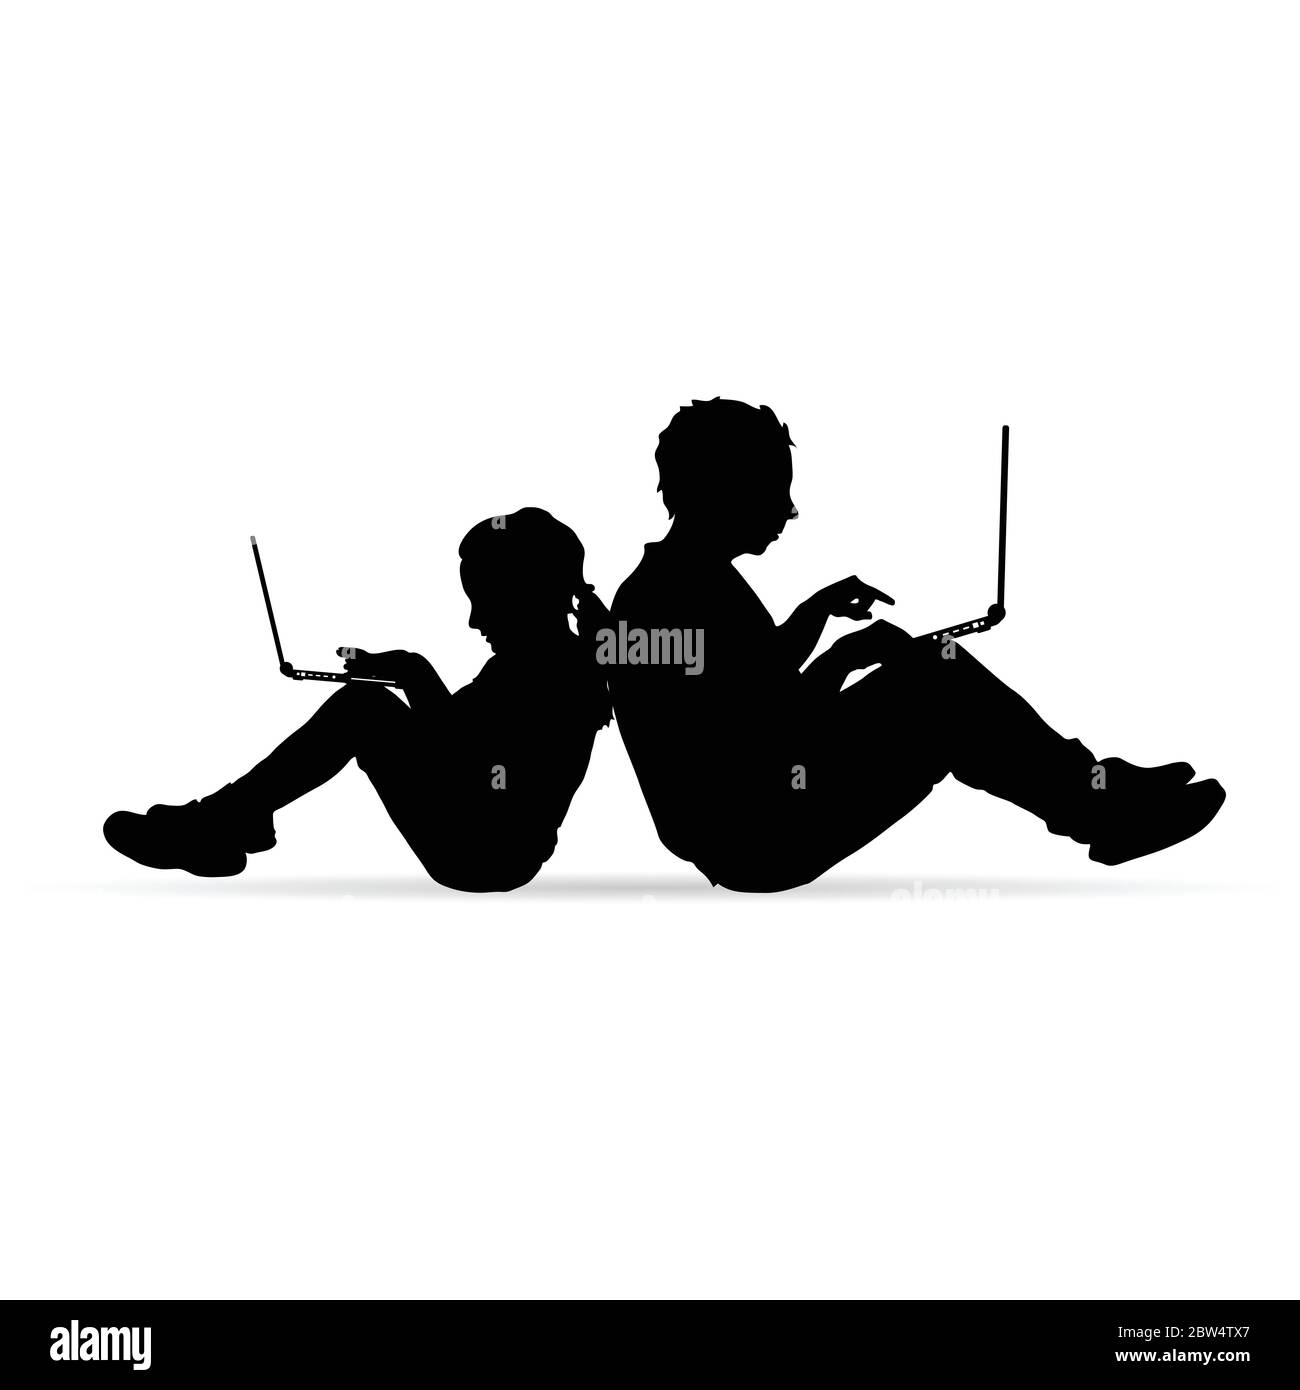 children silhouette with work on laptop illustration in black Stock Vector